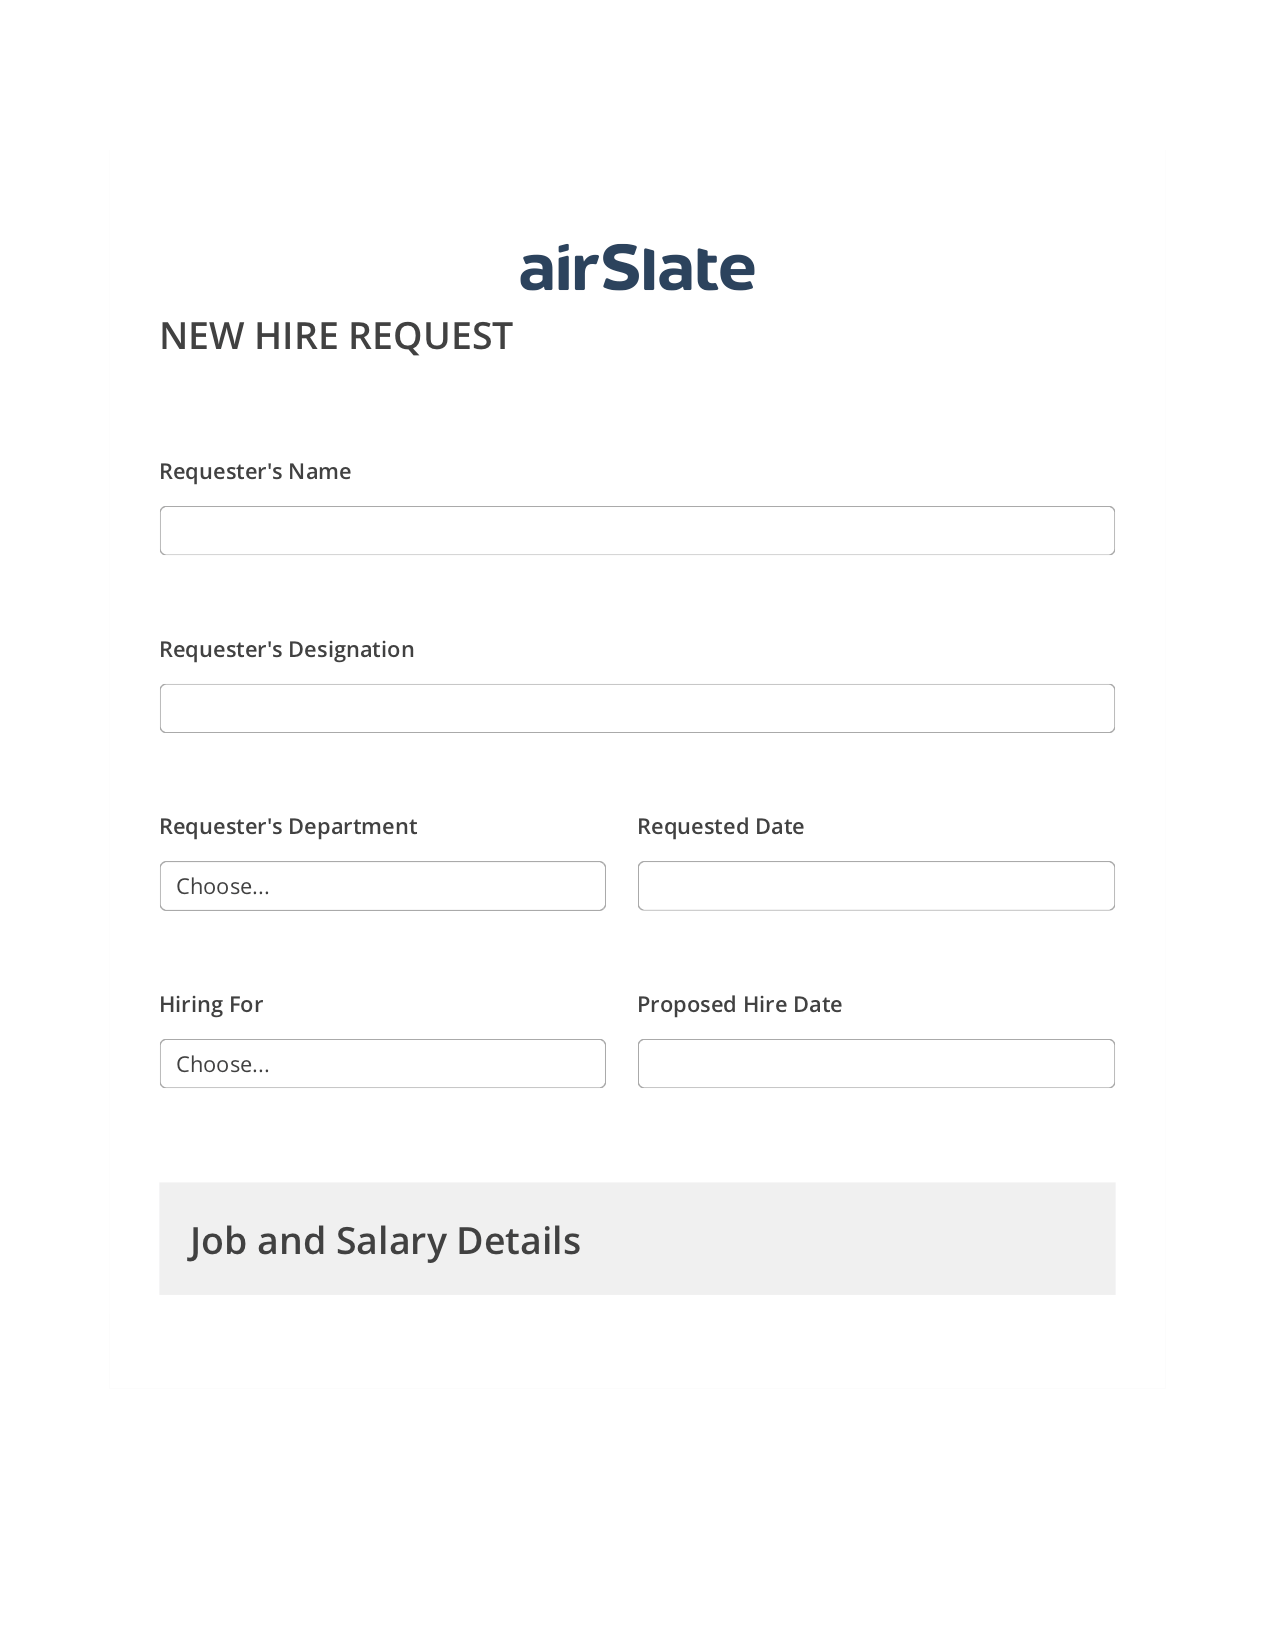 Hiring Request Workflow Pre-fill Dropdowns from CSV file Bot, Create NetSuite Record bot, Archive to OneDrive Bot